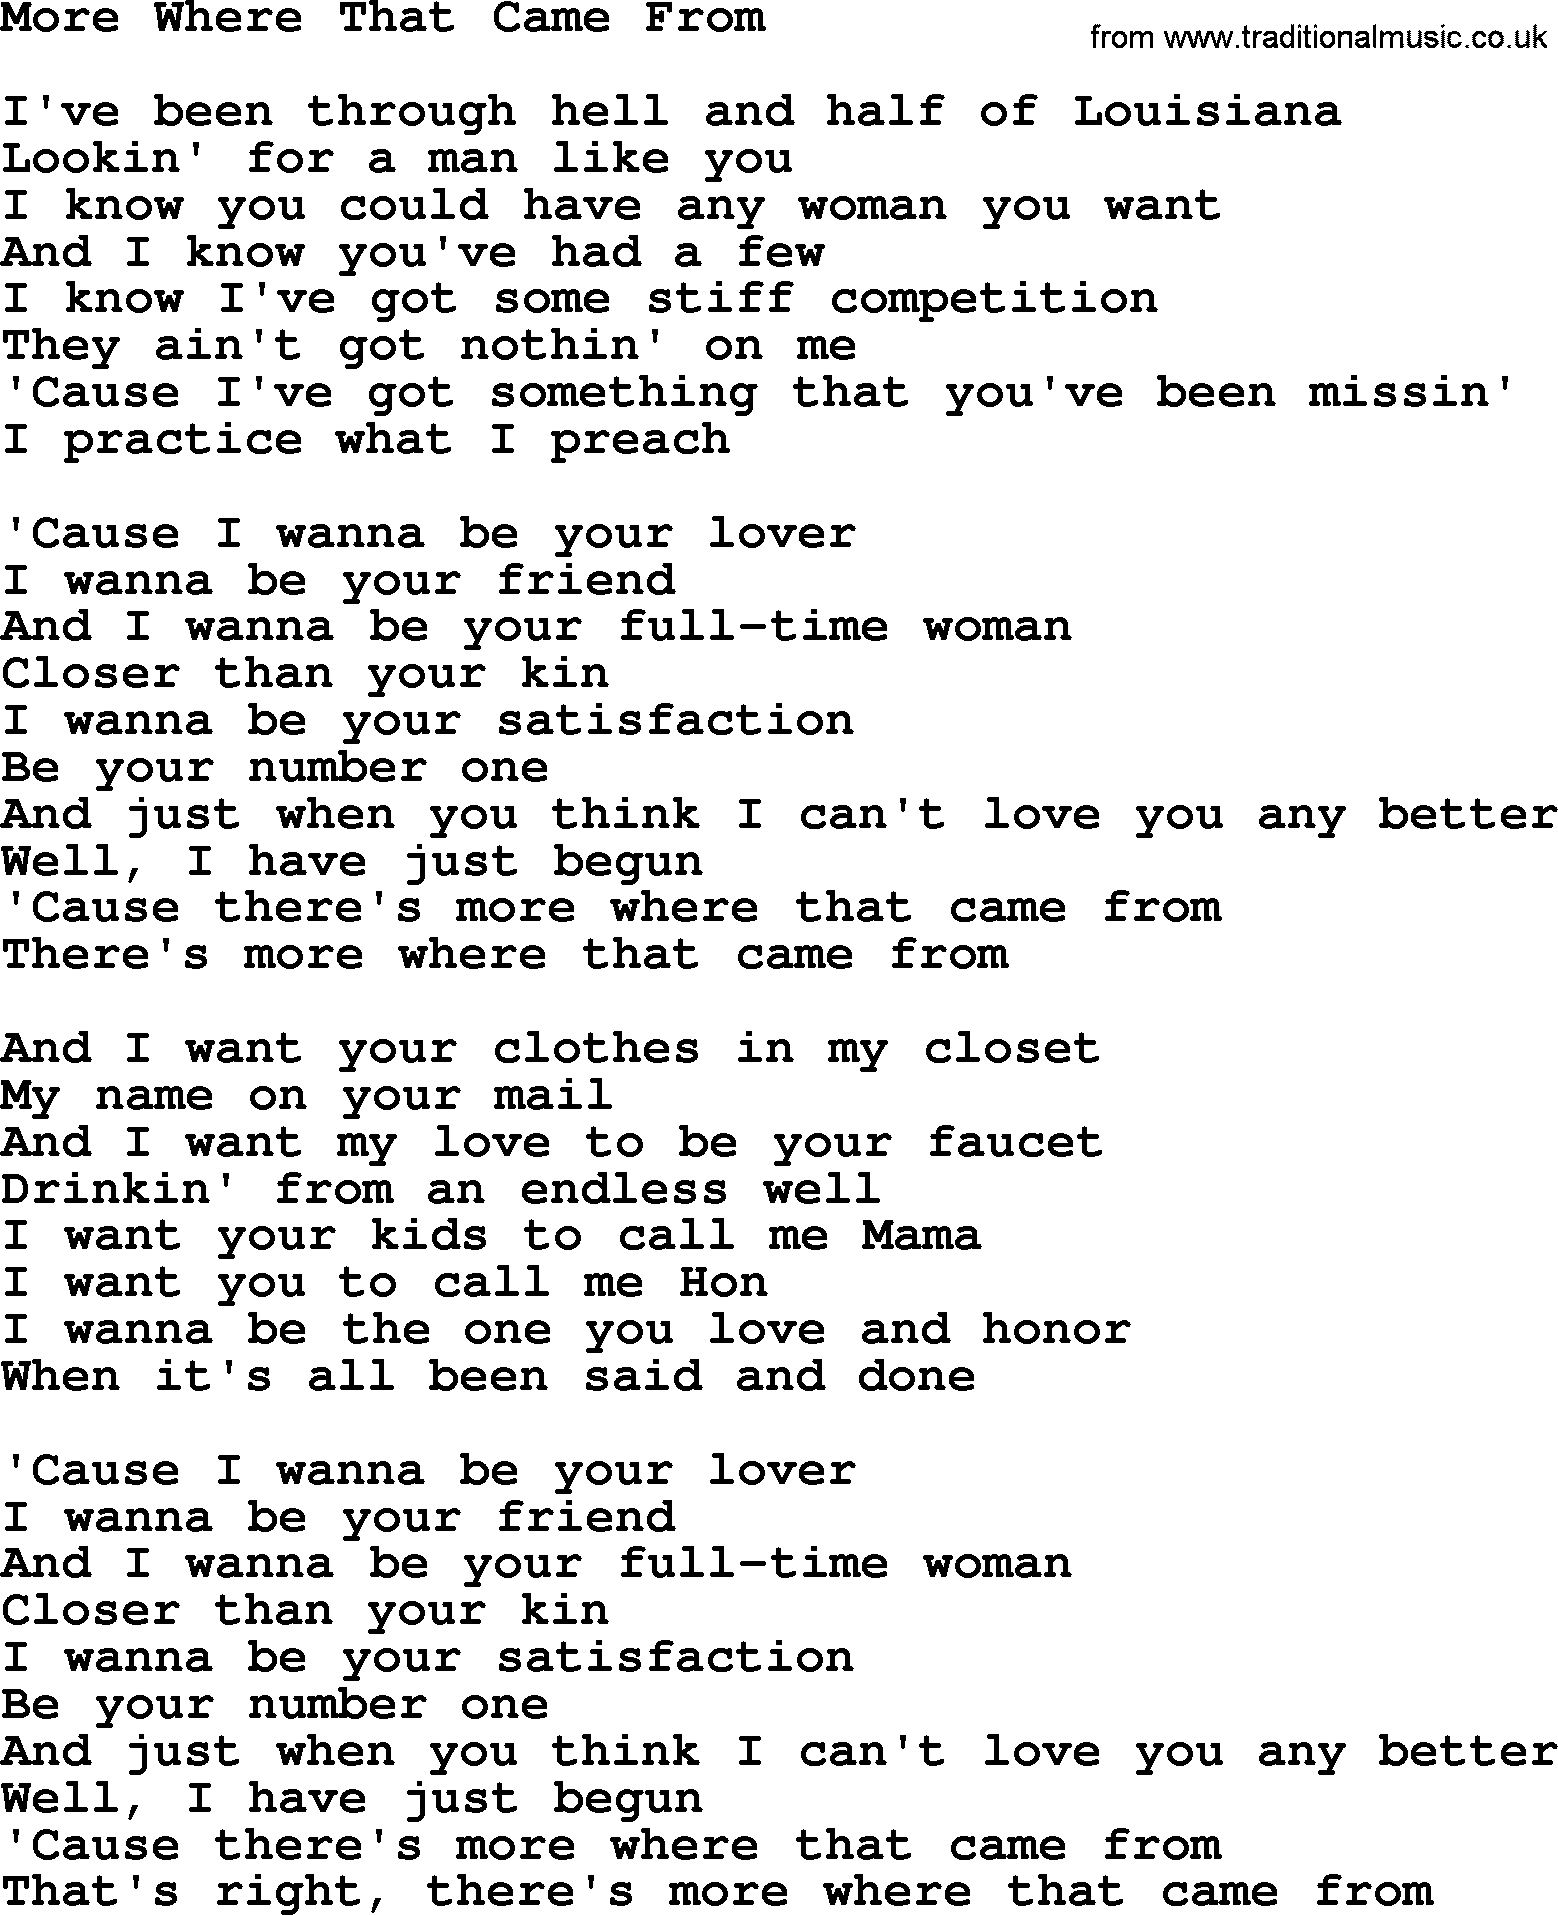 Dolly Parton song More Where That Came From.txt lyrics